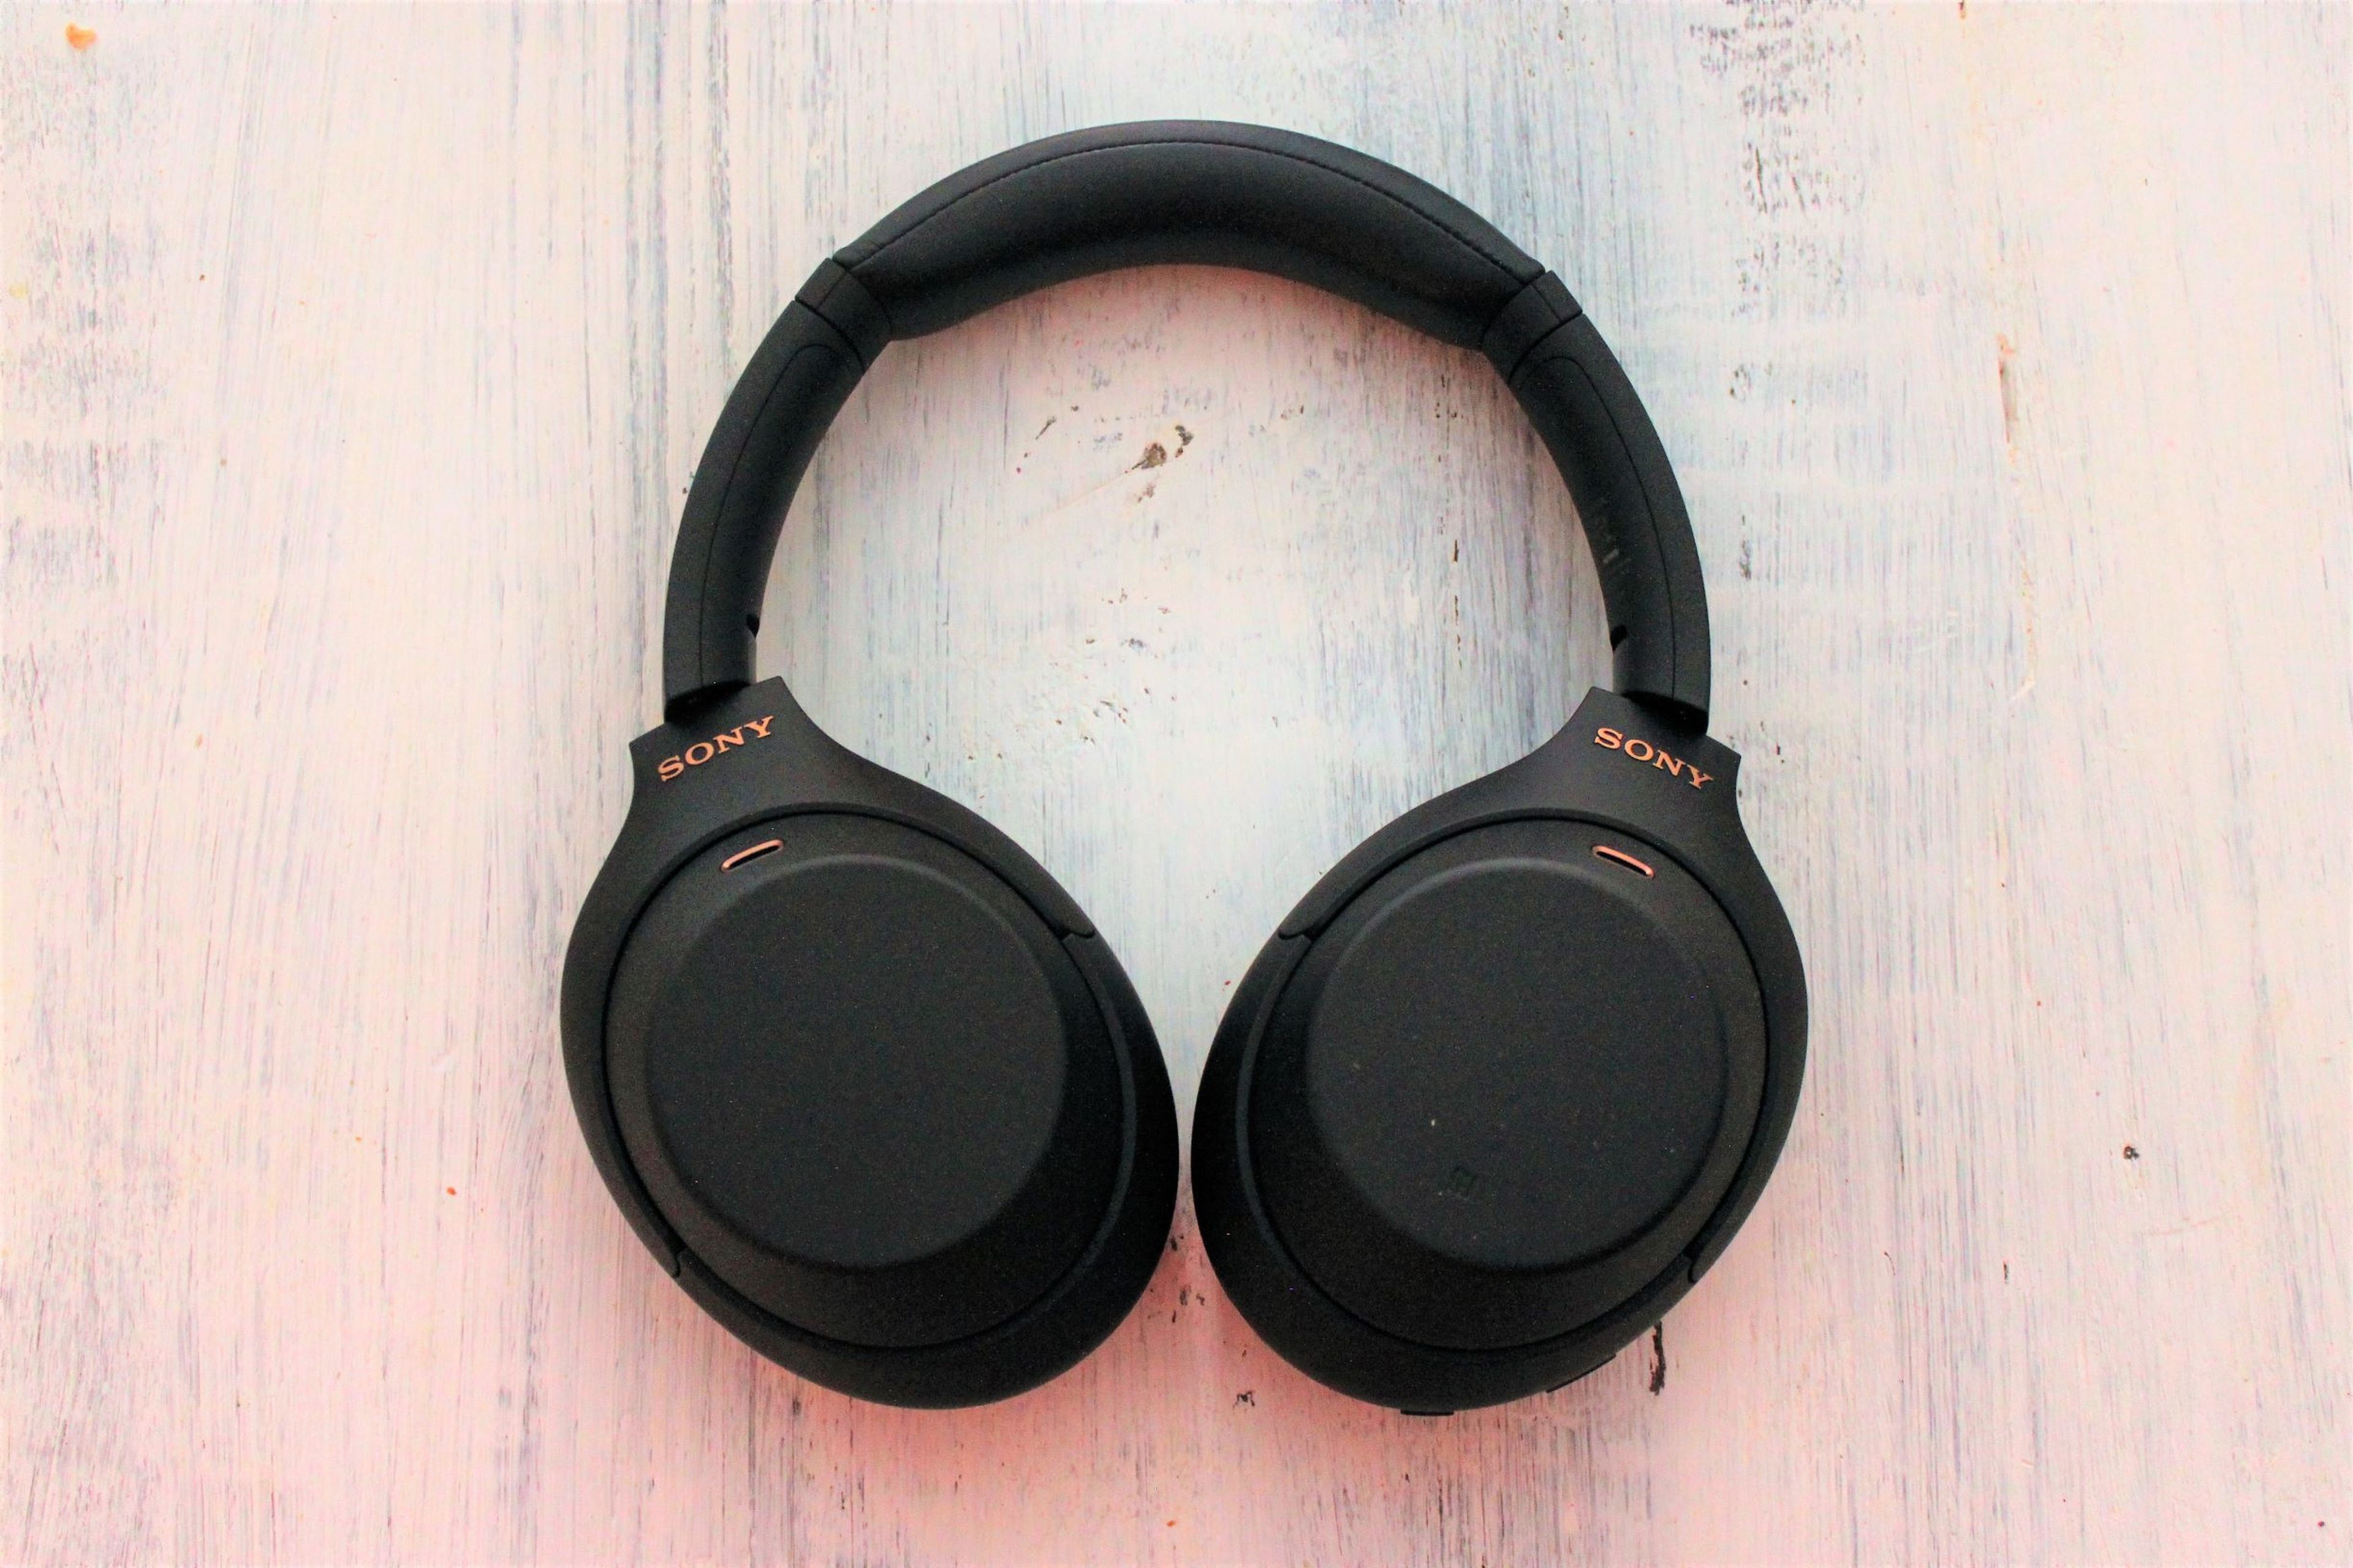 Analisis Auriculares Sony WH1000XM4